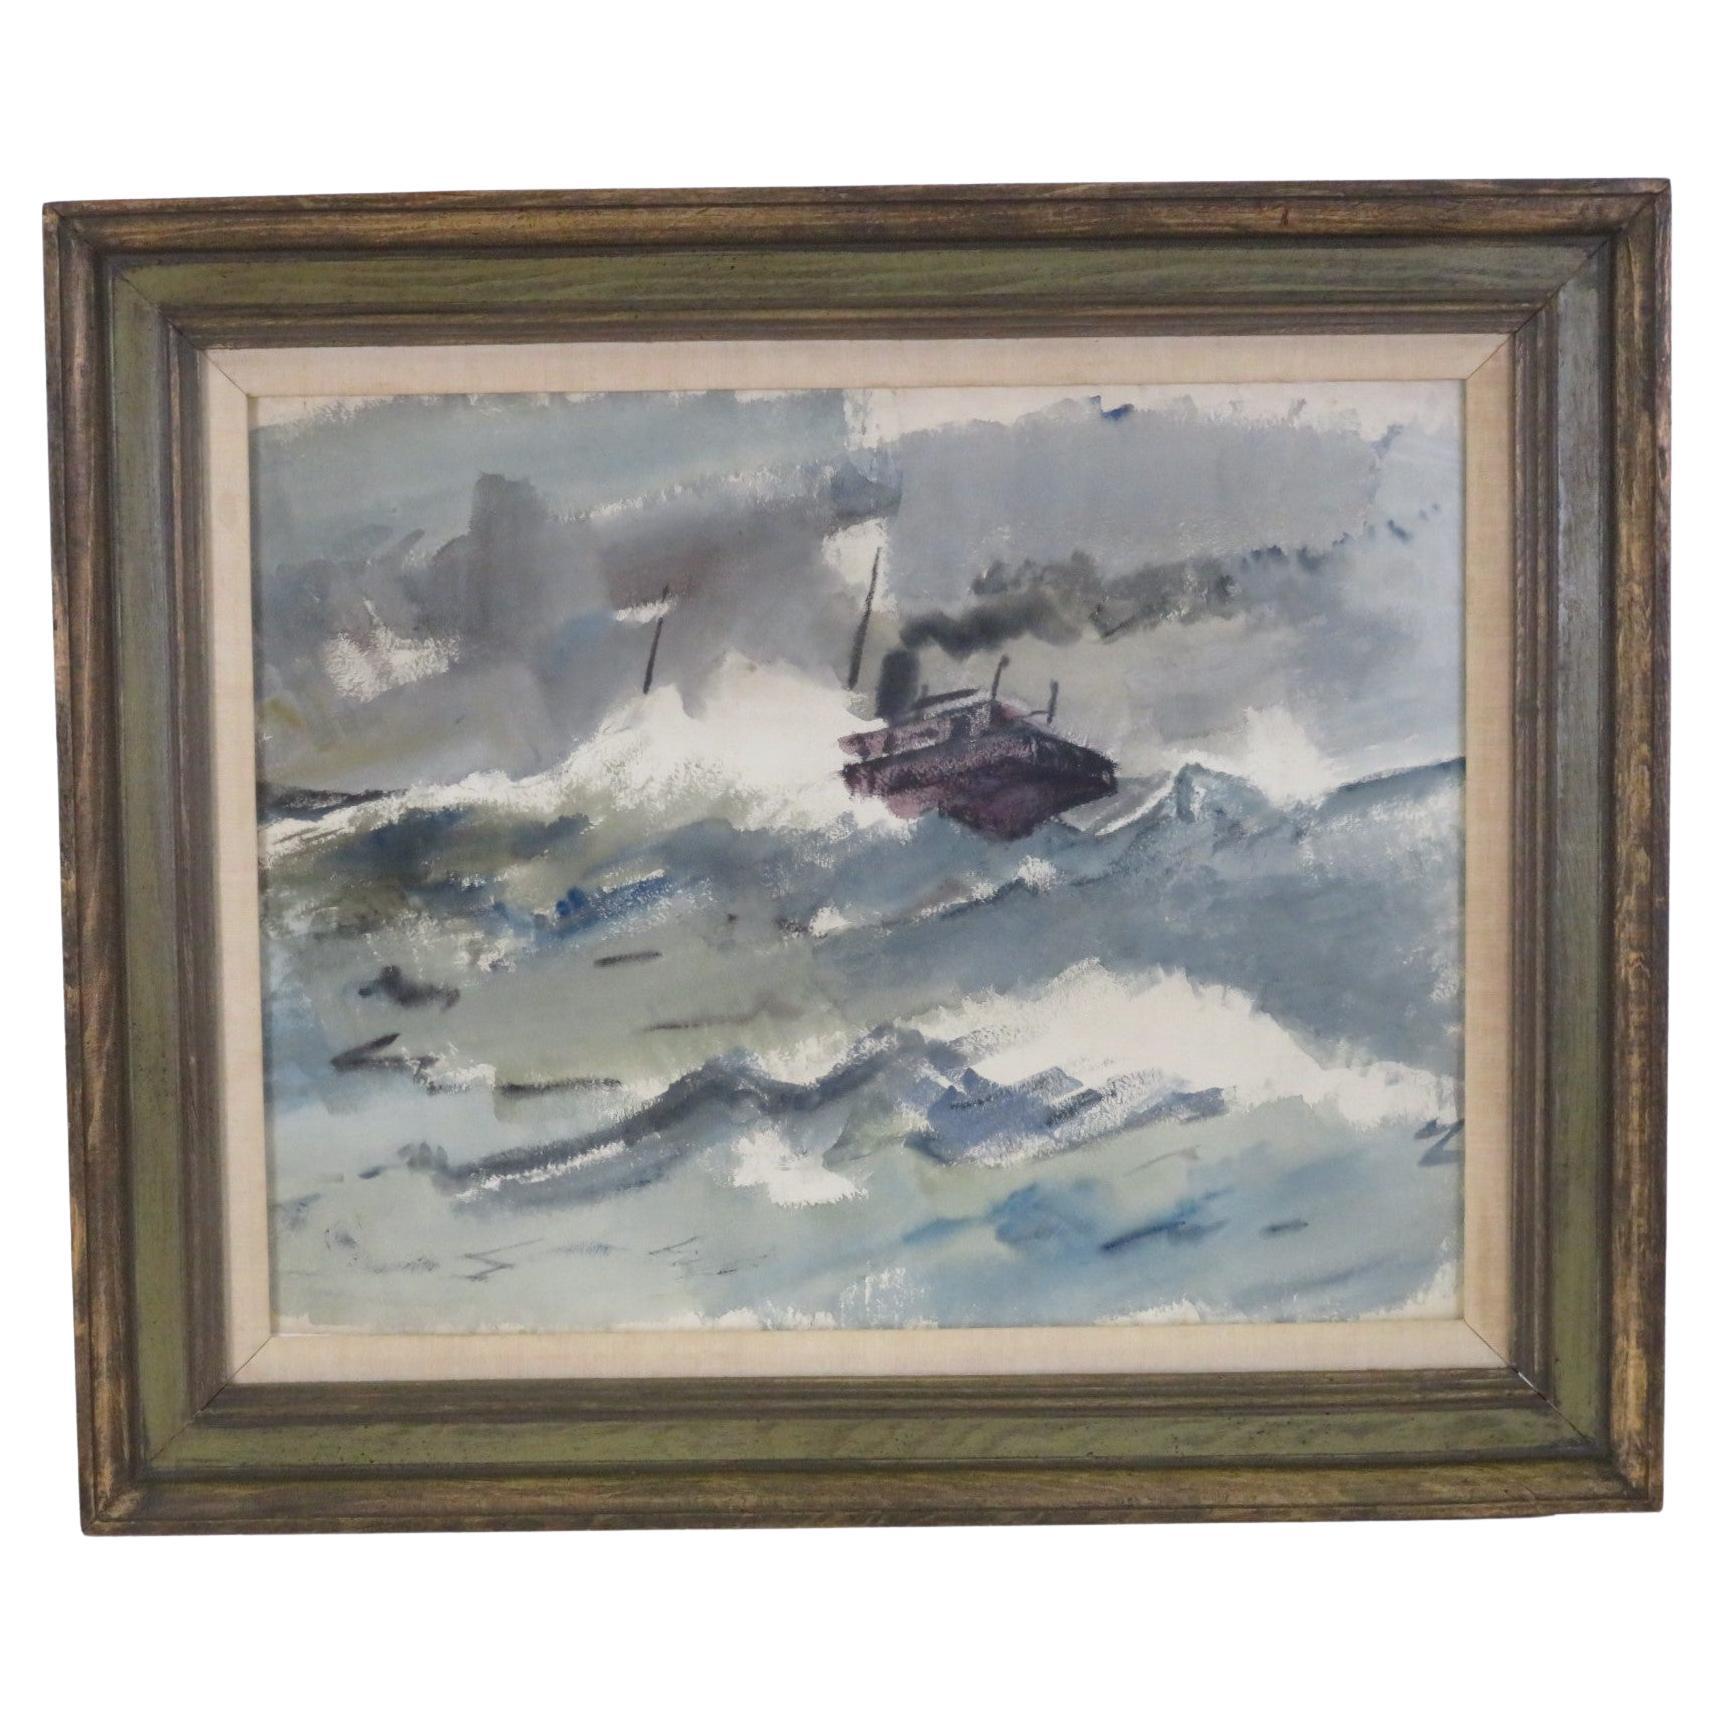 1950s Painting "Stormy Night" Casein on Paper by New York Artist